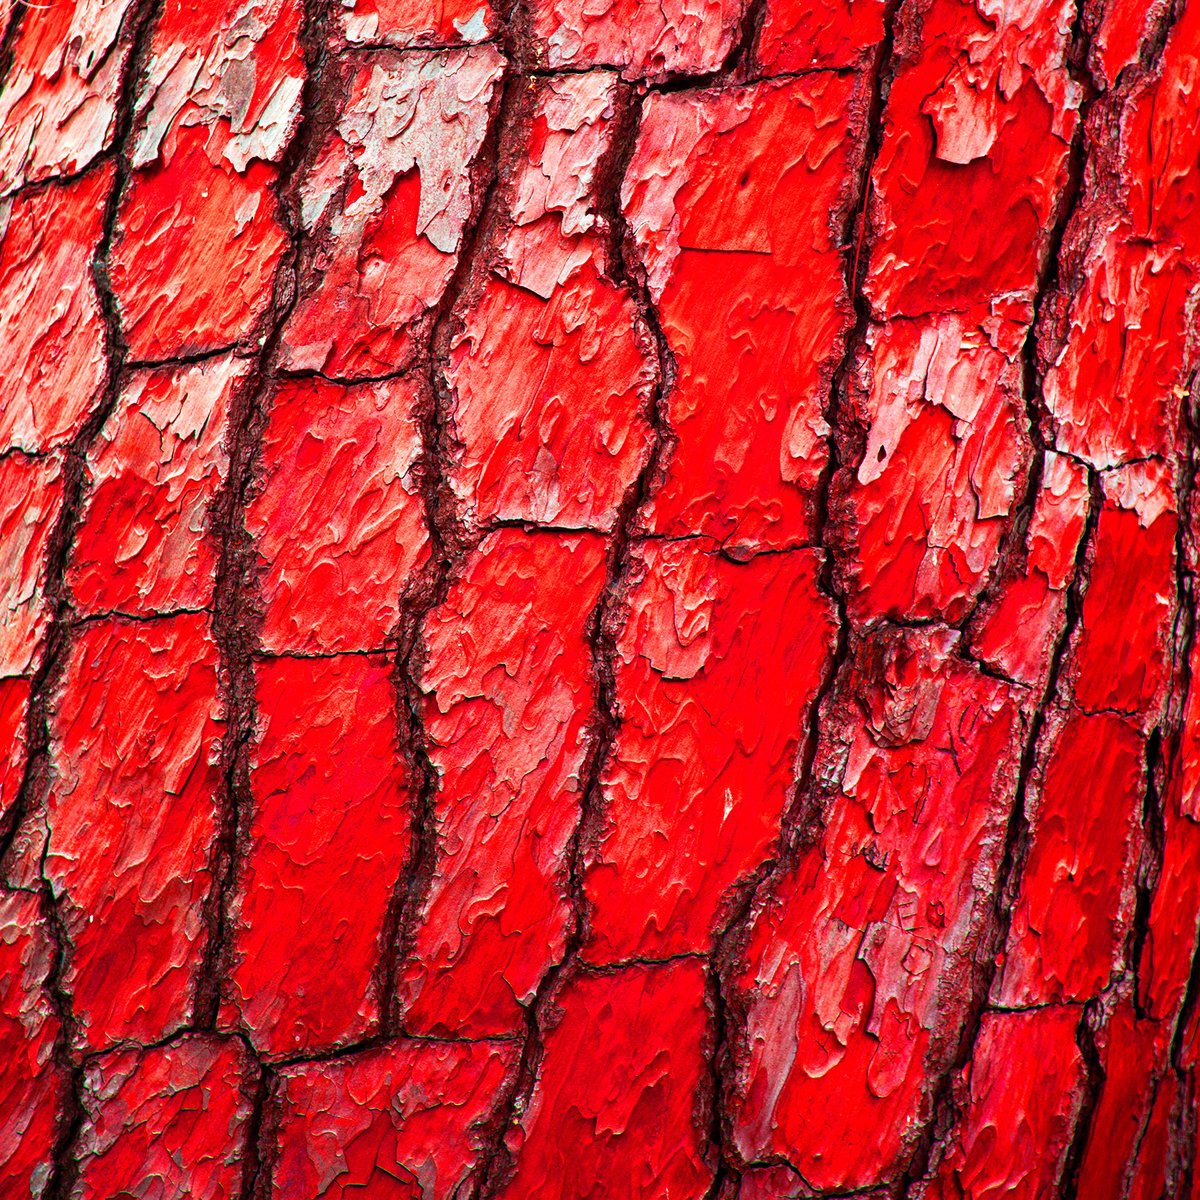 Natural Abstracts - Redwood Bark by Ken Skehan